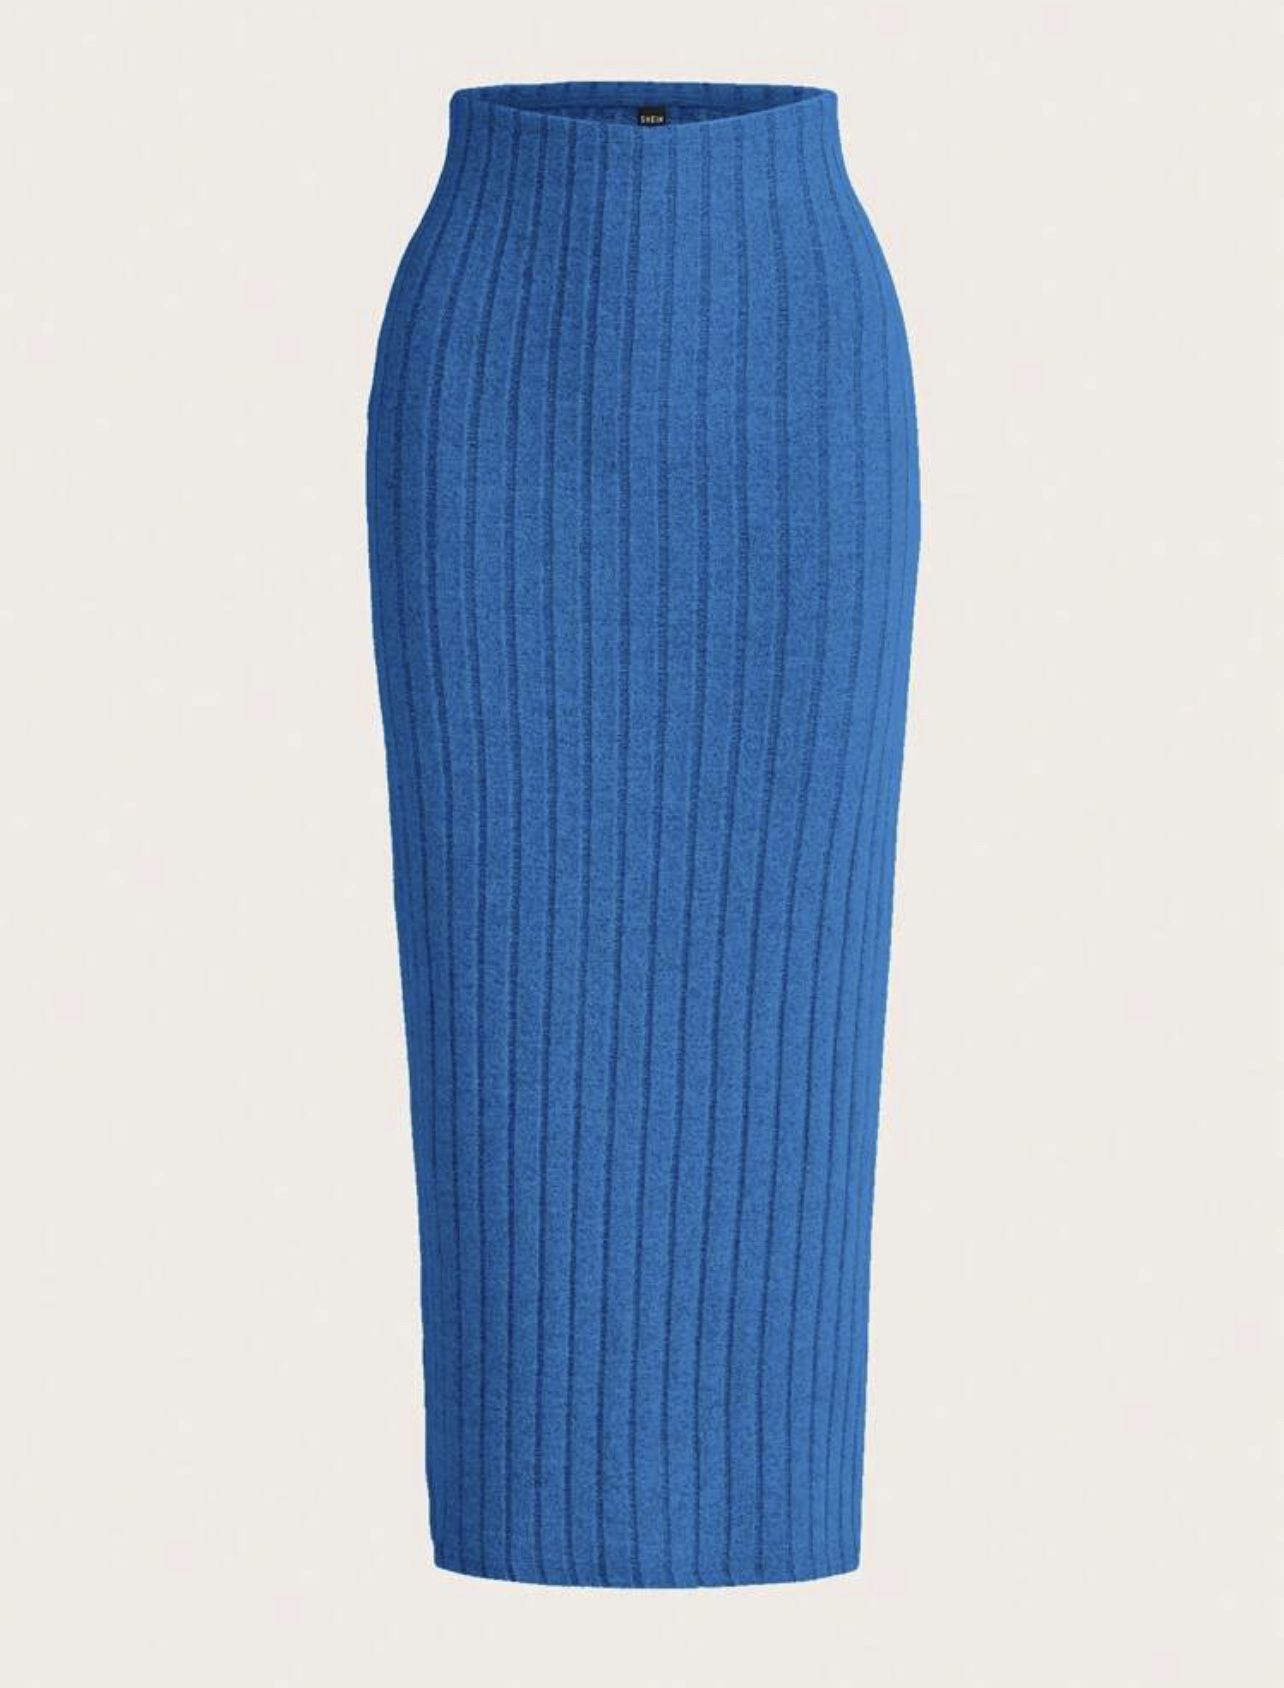 EZwear Solid Ribbed Knit Pencil Skirt *NEW*